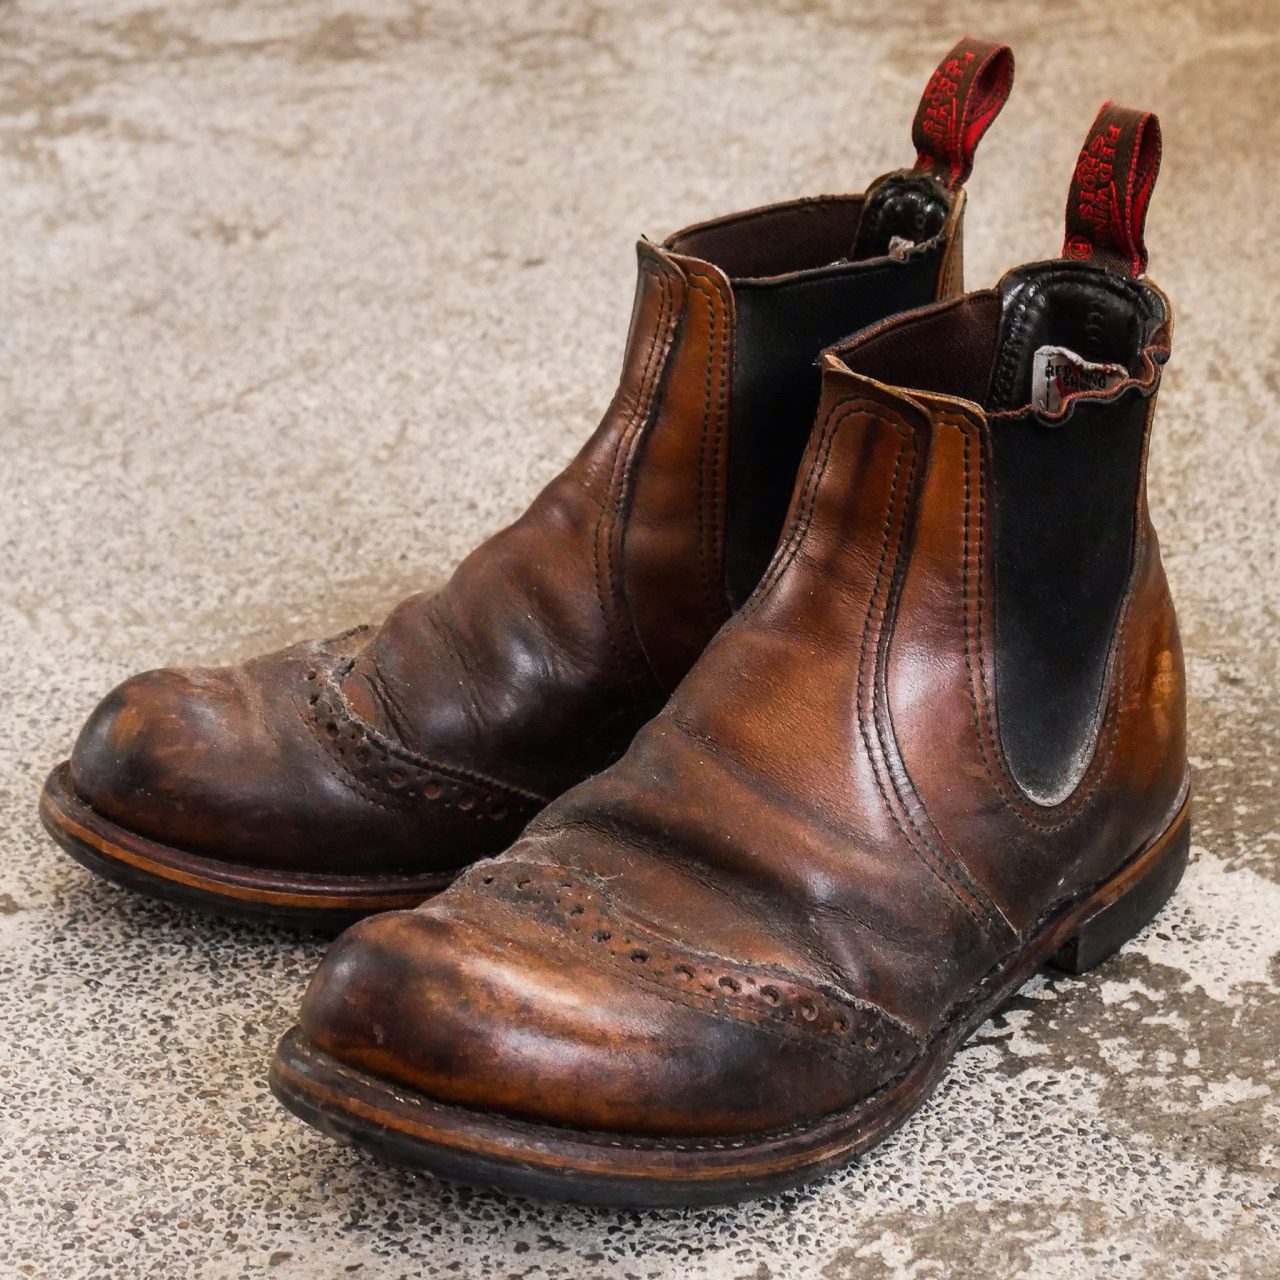 Red Wing Shoes Owners Club